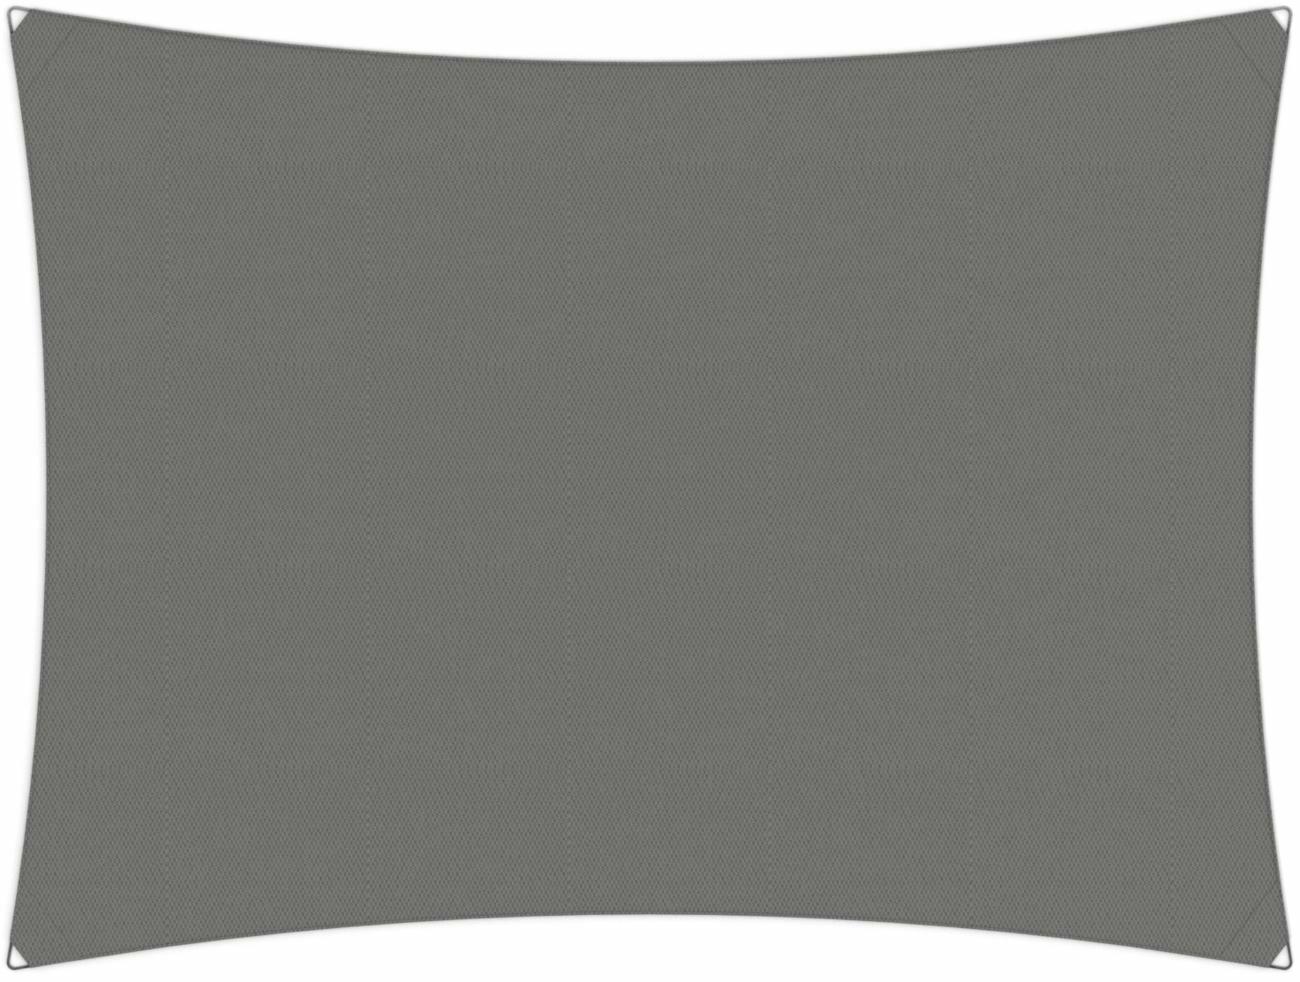 Ingenua shade sail Rectangle 5 x 3 m, for outdoor use. Colour of the fabric shade sail Grey.